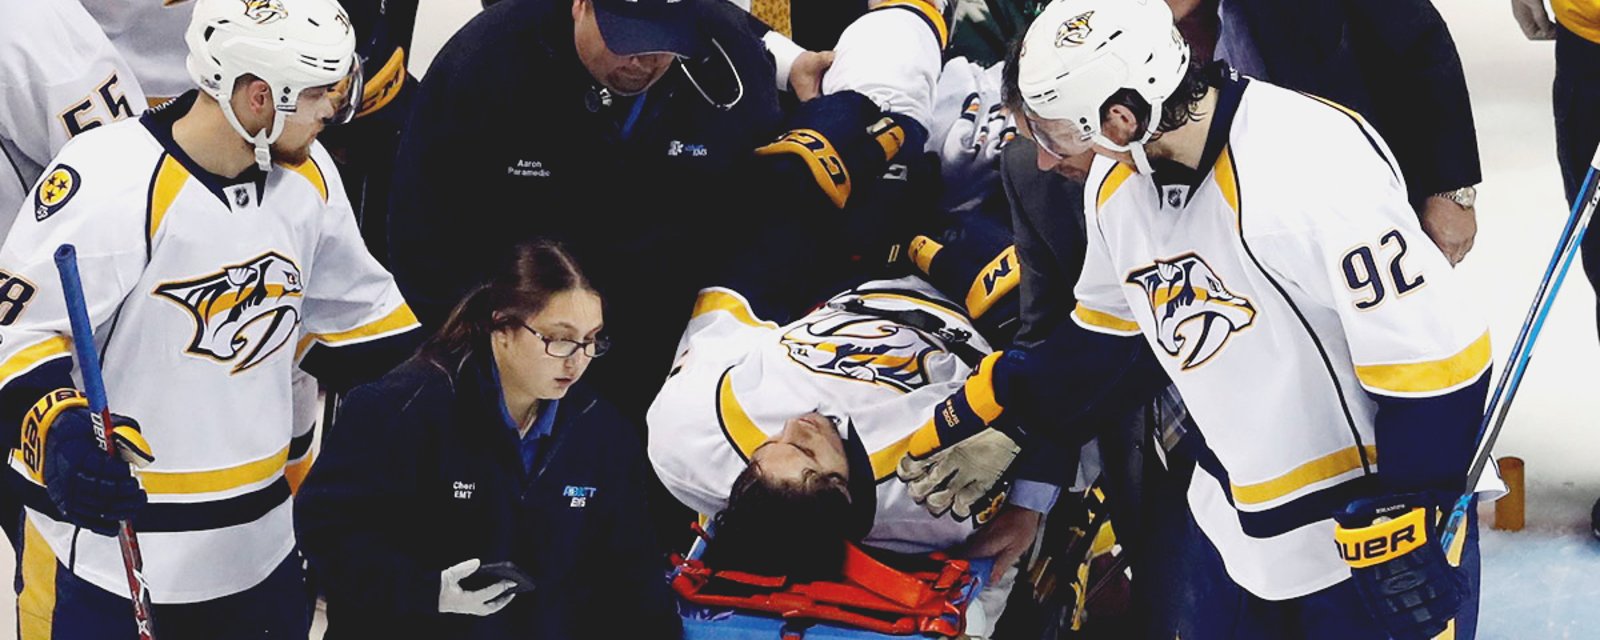 BREAKING: FRESH &amp;amp; MAJOR update on Kevin Fiala's scary injury.